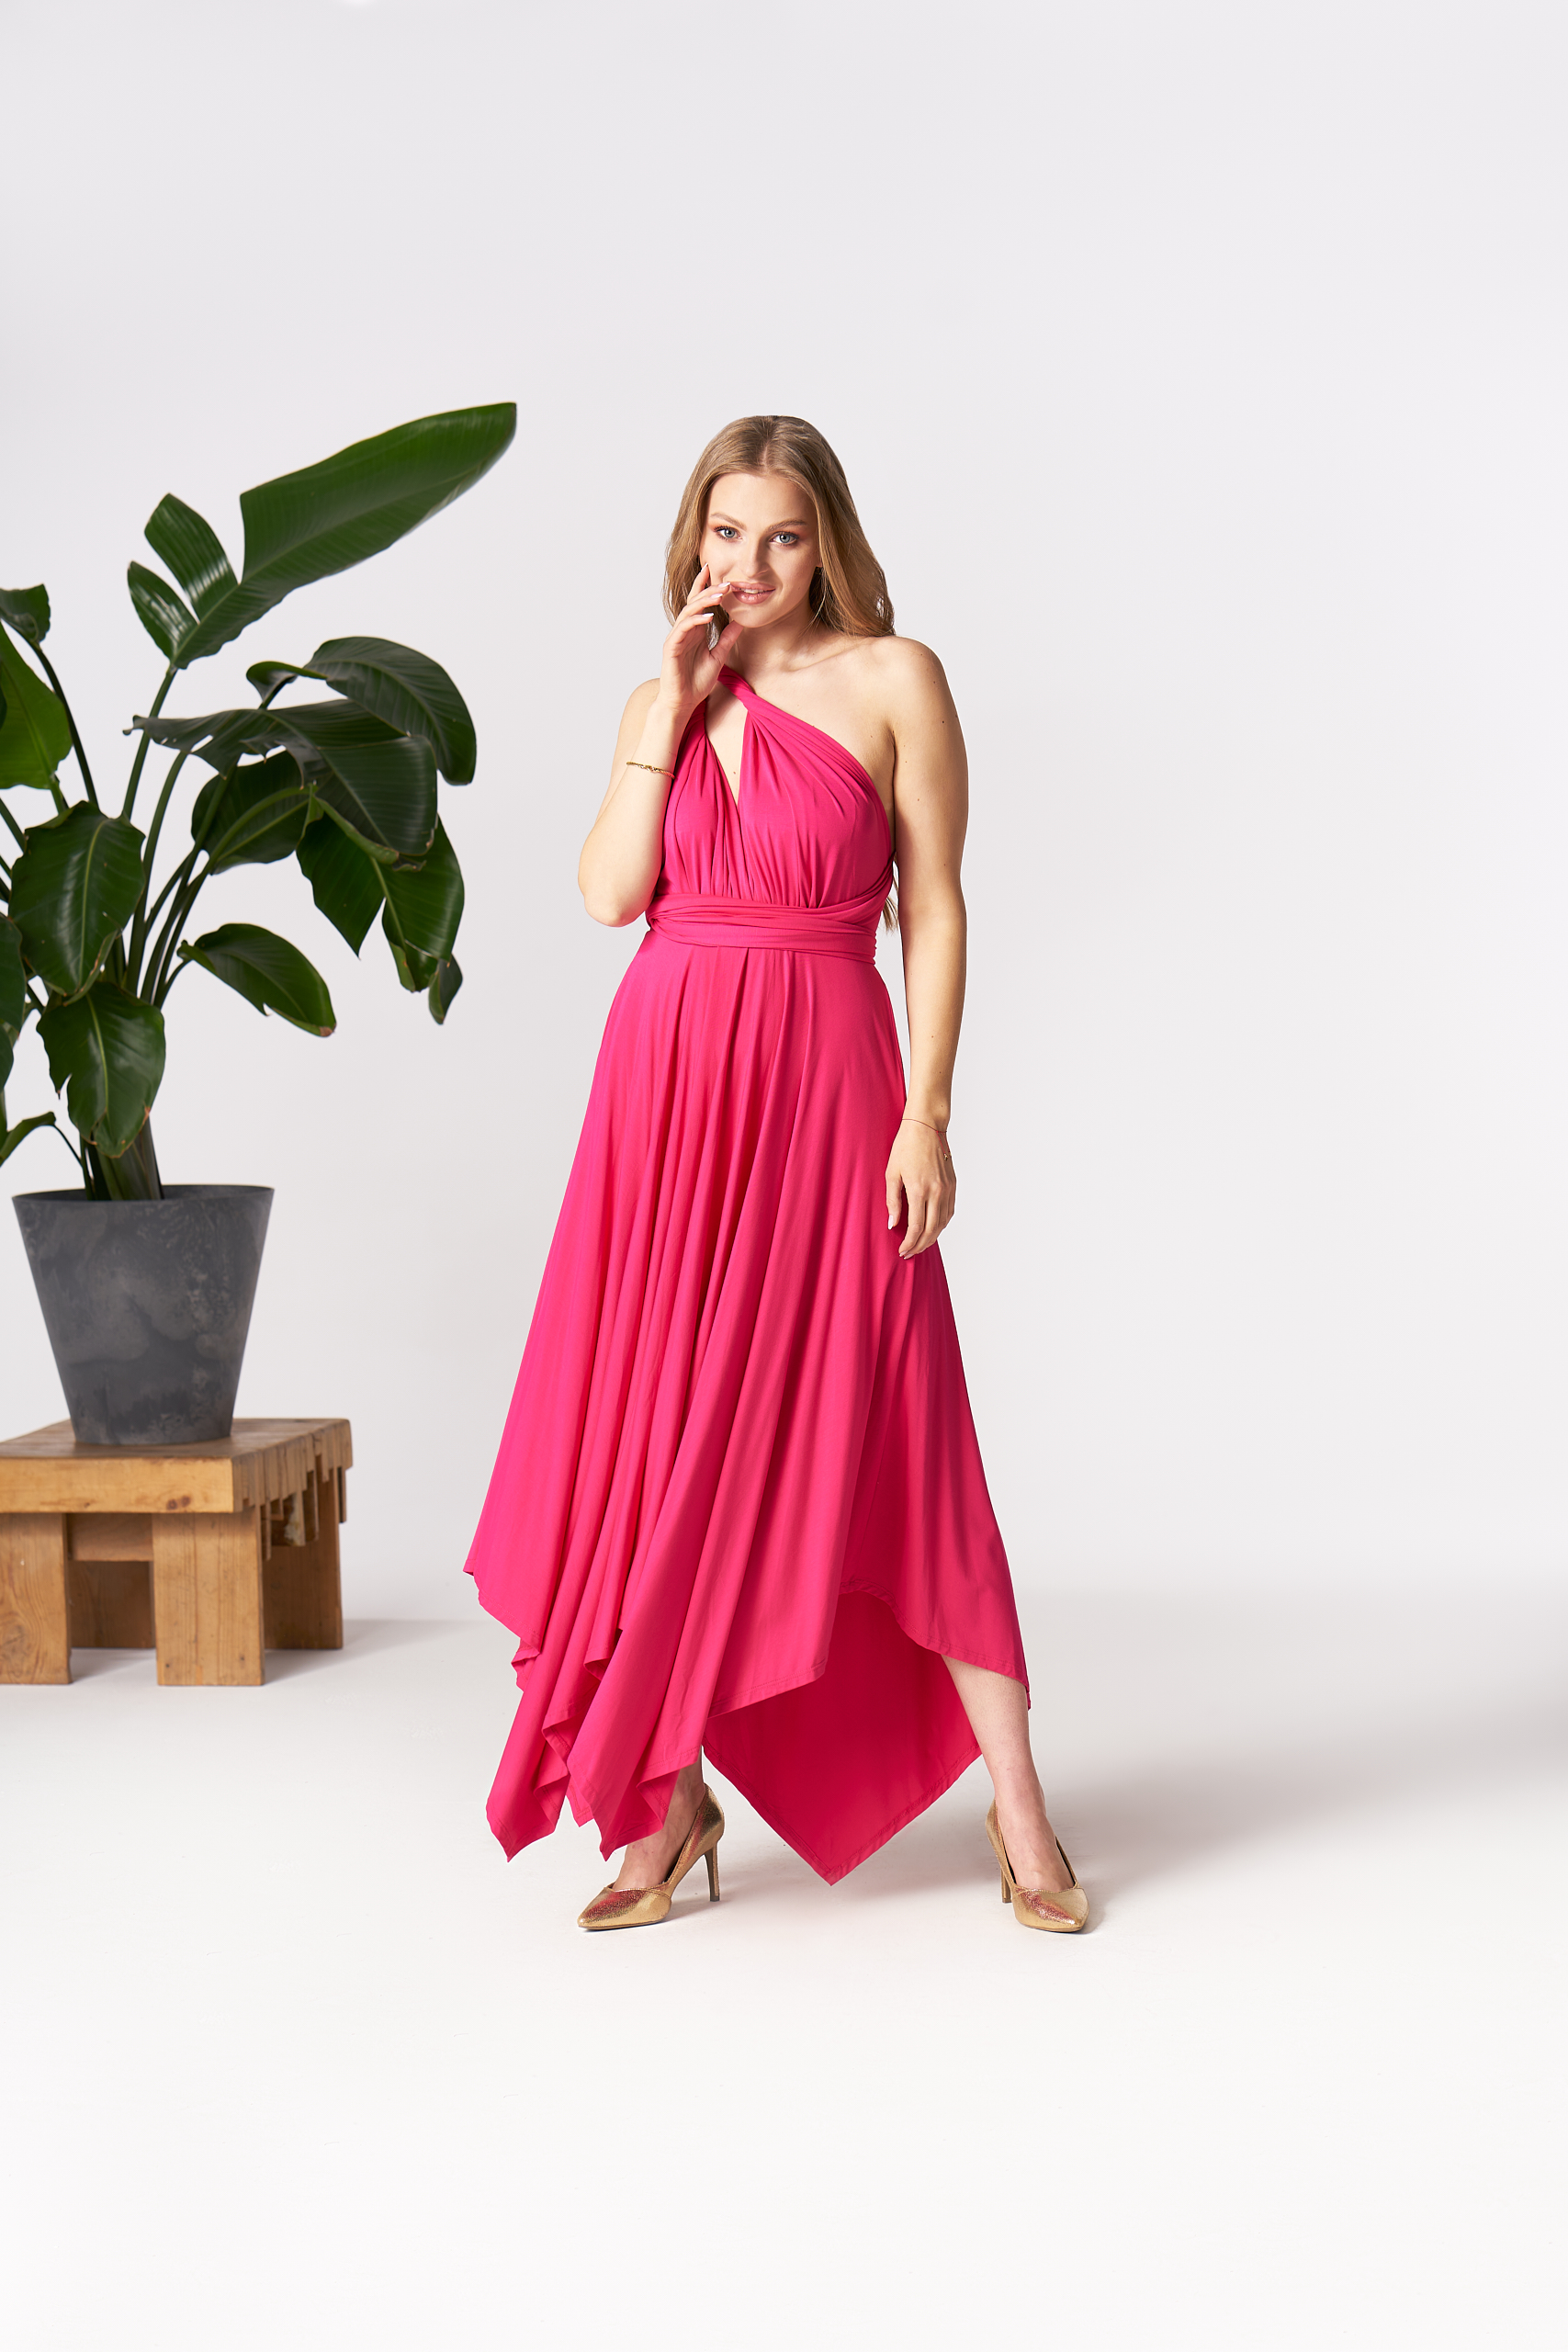 Levně By Your Side Woman's Maxi Dress Infinity Summer